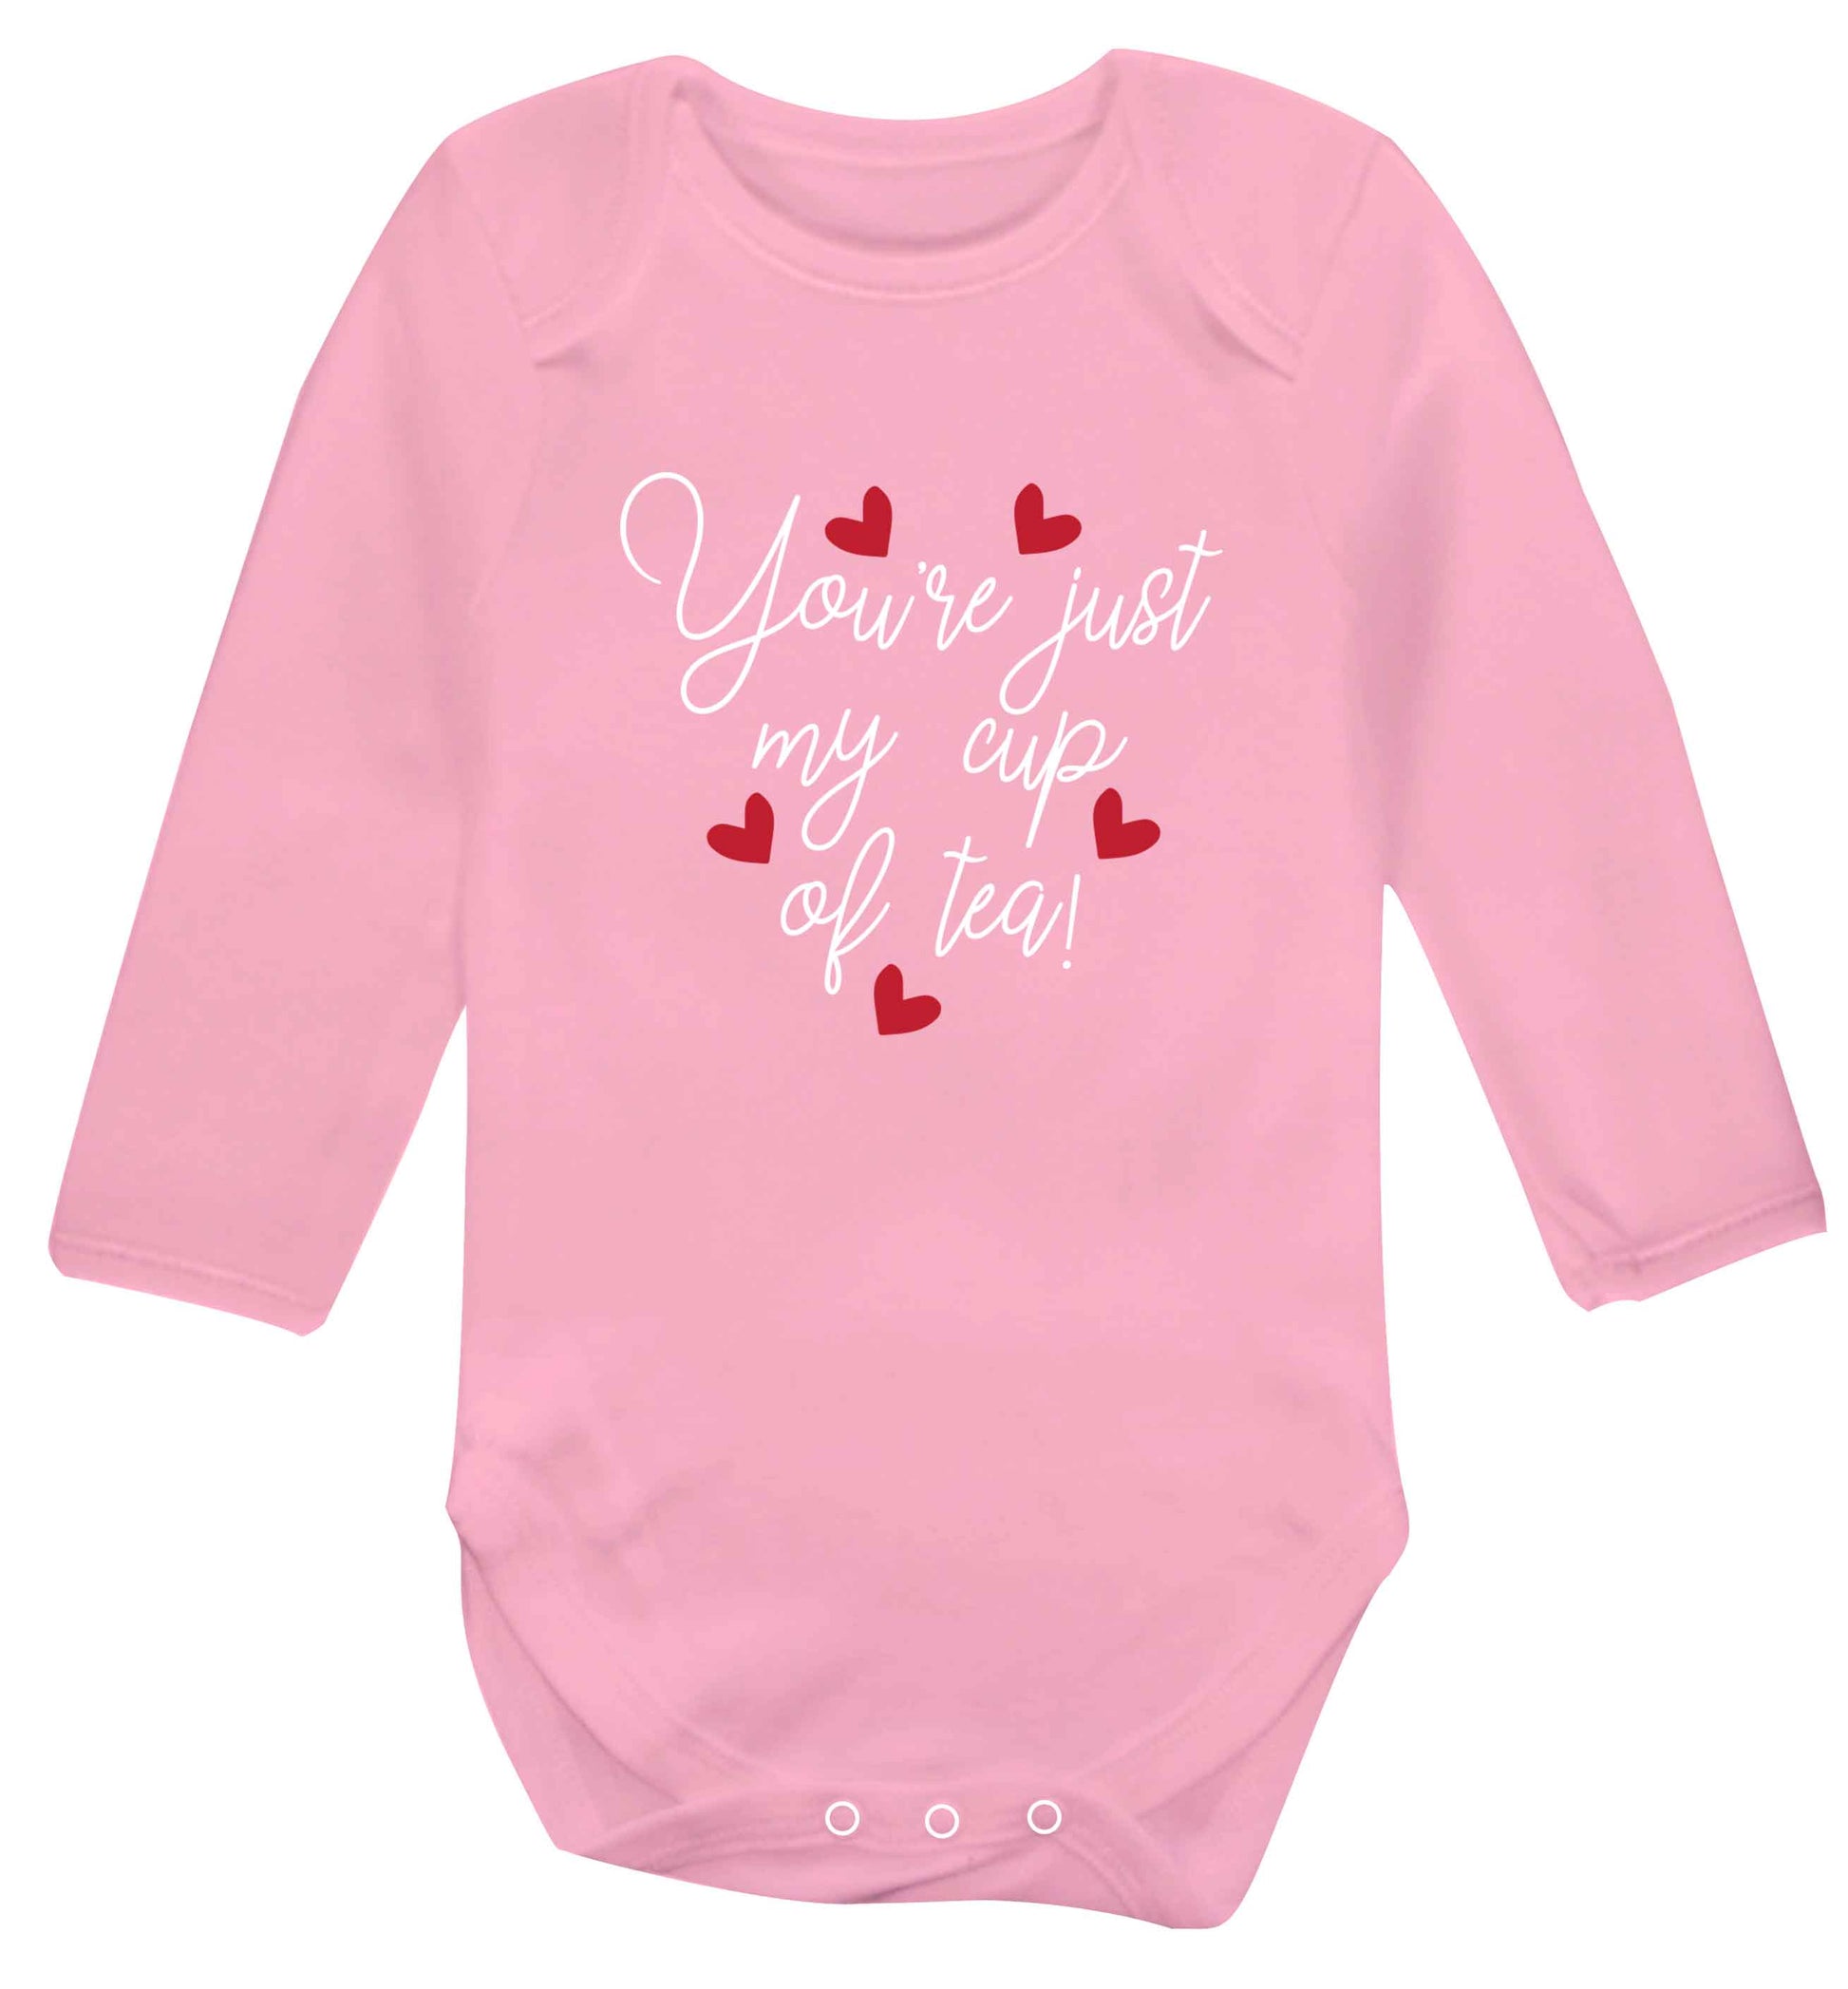 You're just my cup of tea baby vest long sleeved pale pink 6-12 months